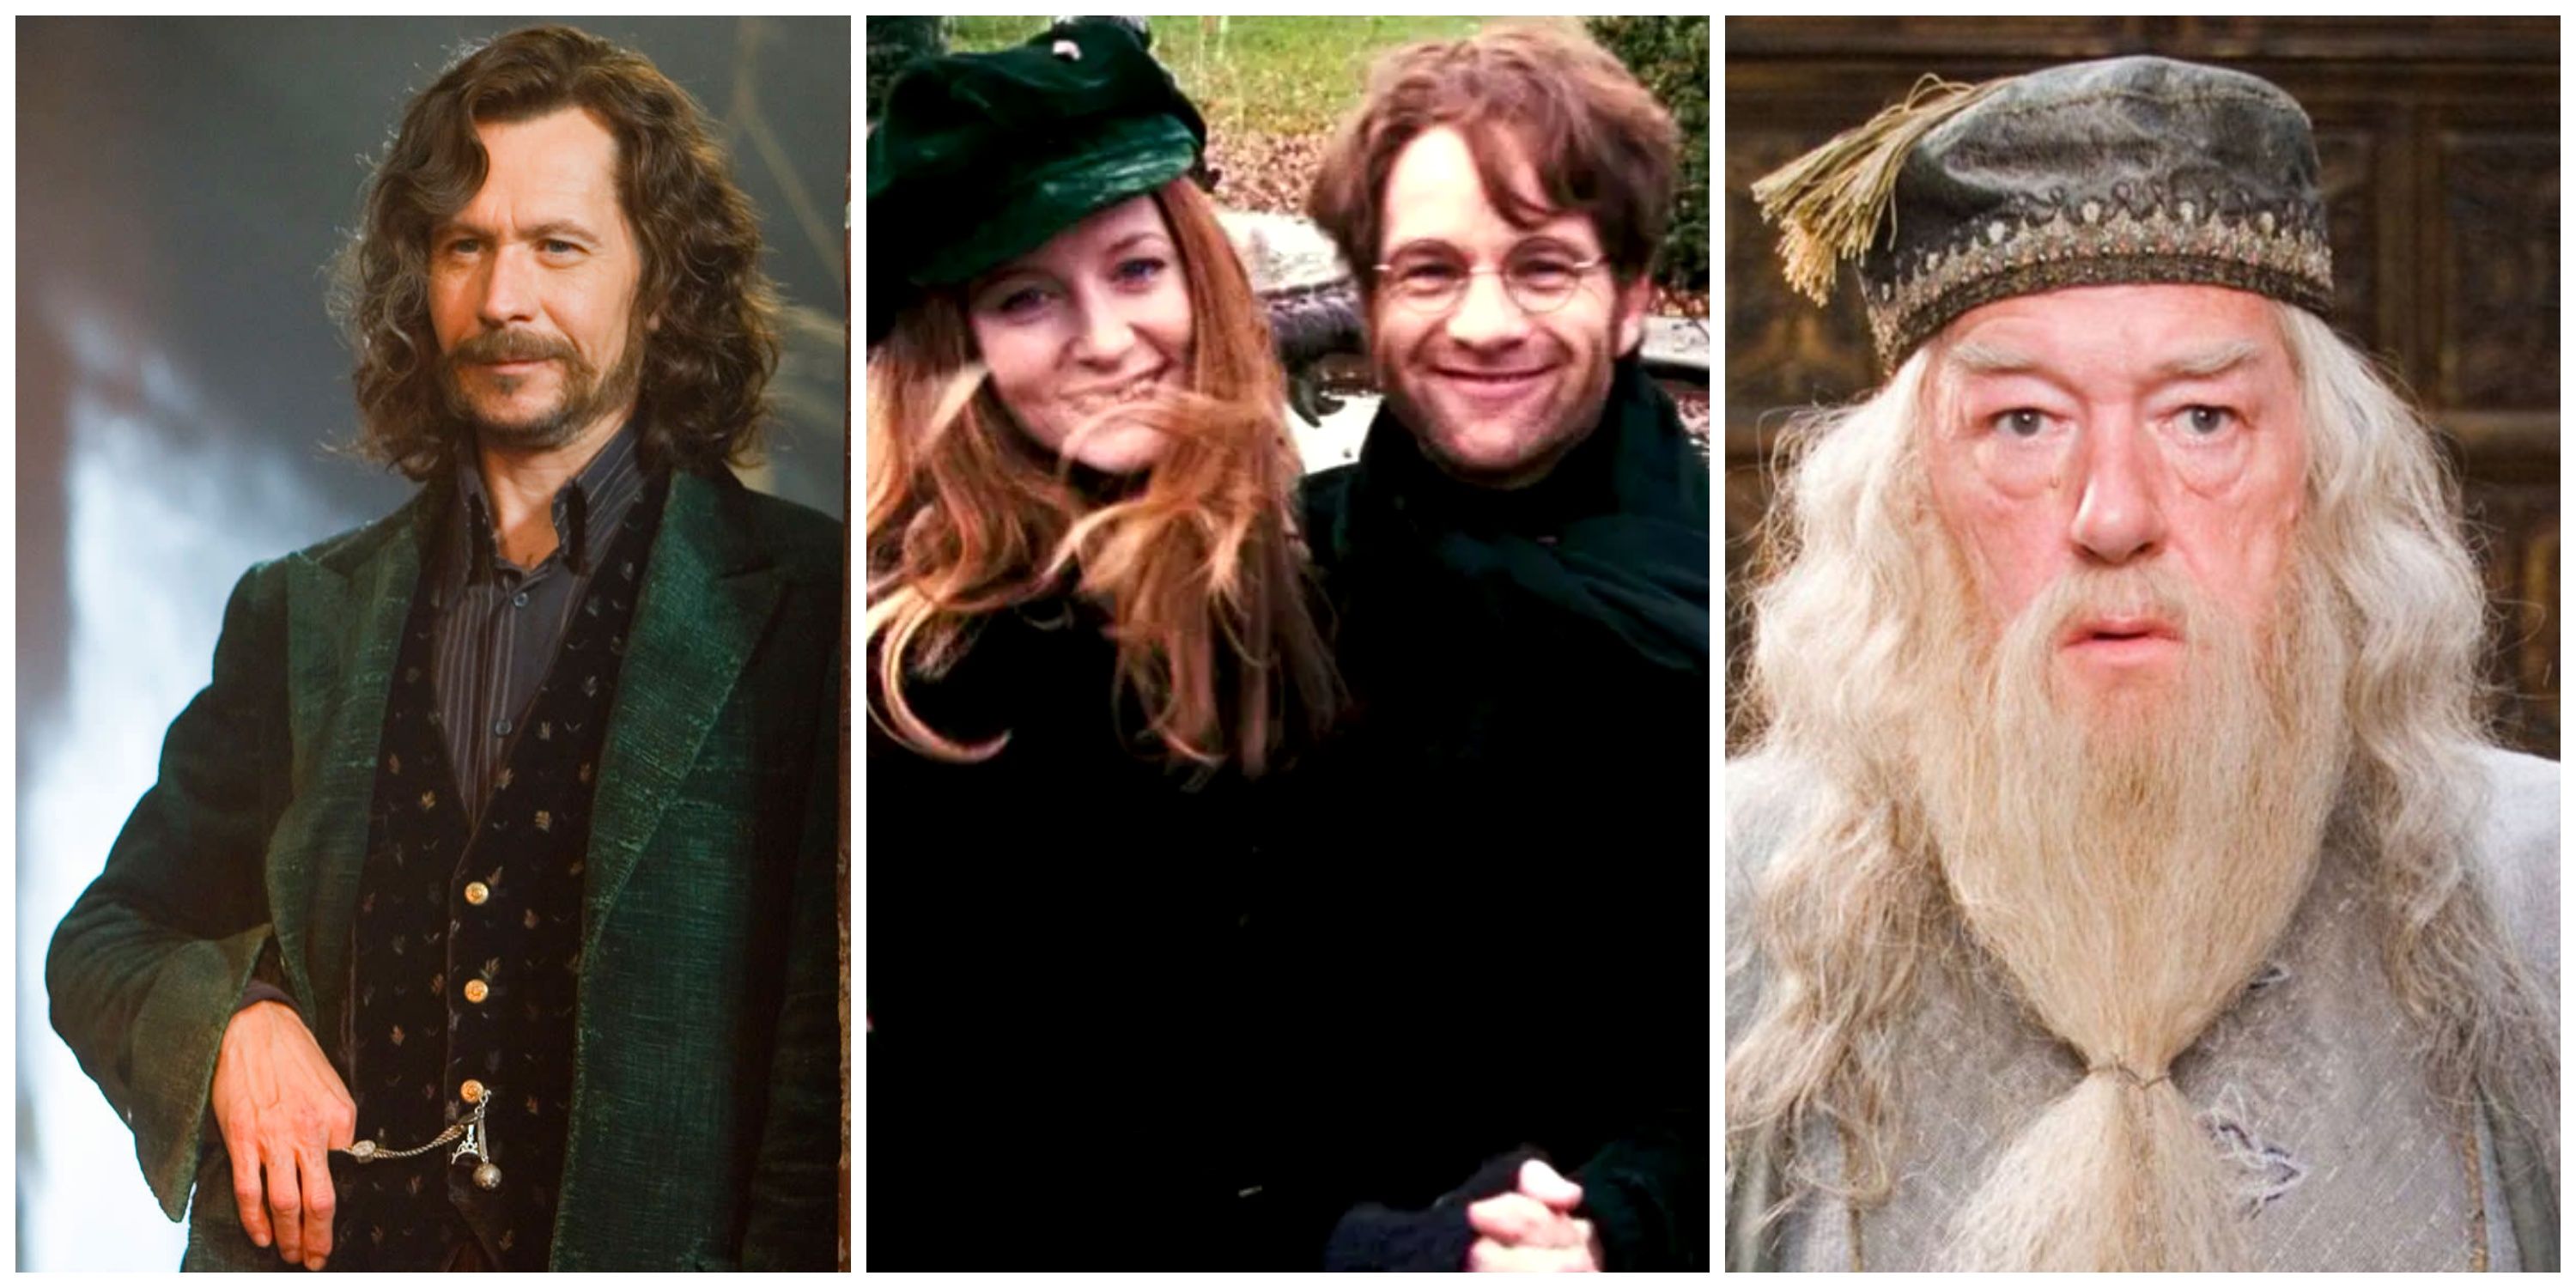 Split image of Sirius Black, James and Lily Potter, and Dumbledore from Harry Potter.